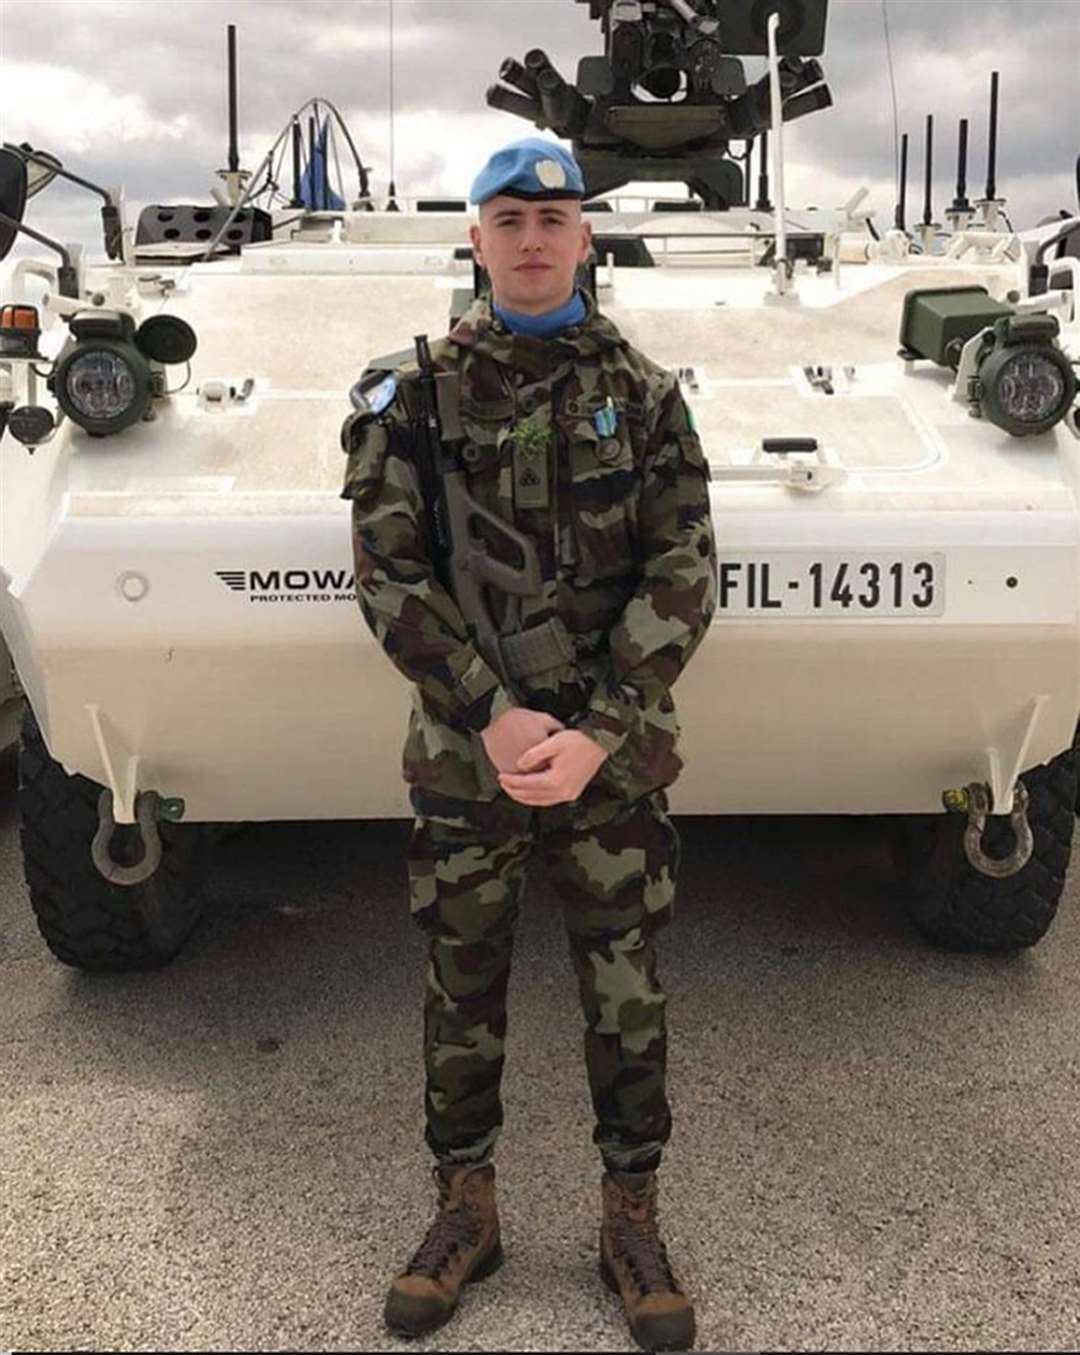 Private Sean Rooney of Newtowncunningham in Co Donegal, the Irish peacekeeping soldier killed in Lebanon (Defence Forces/PA)